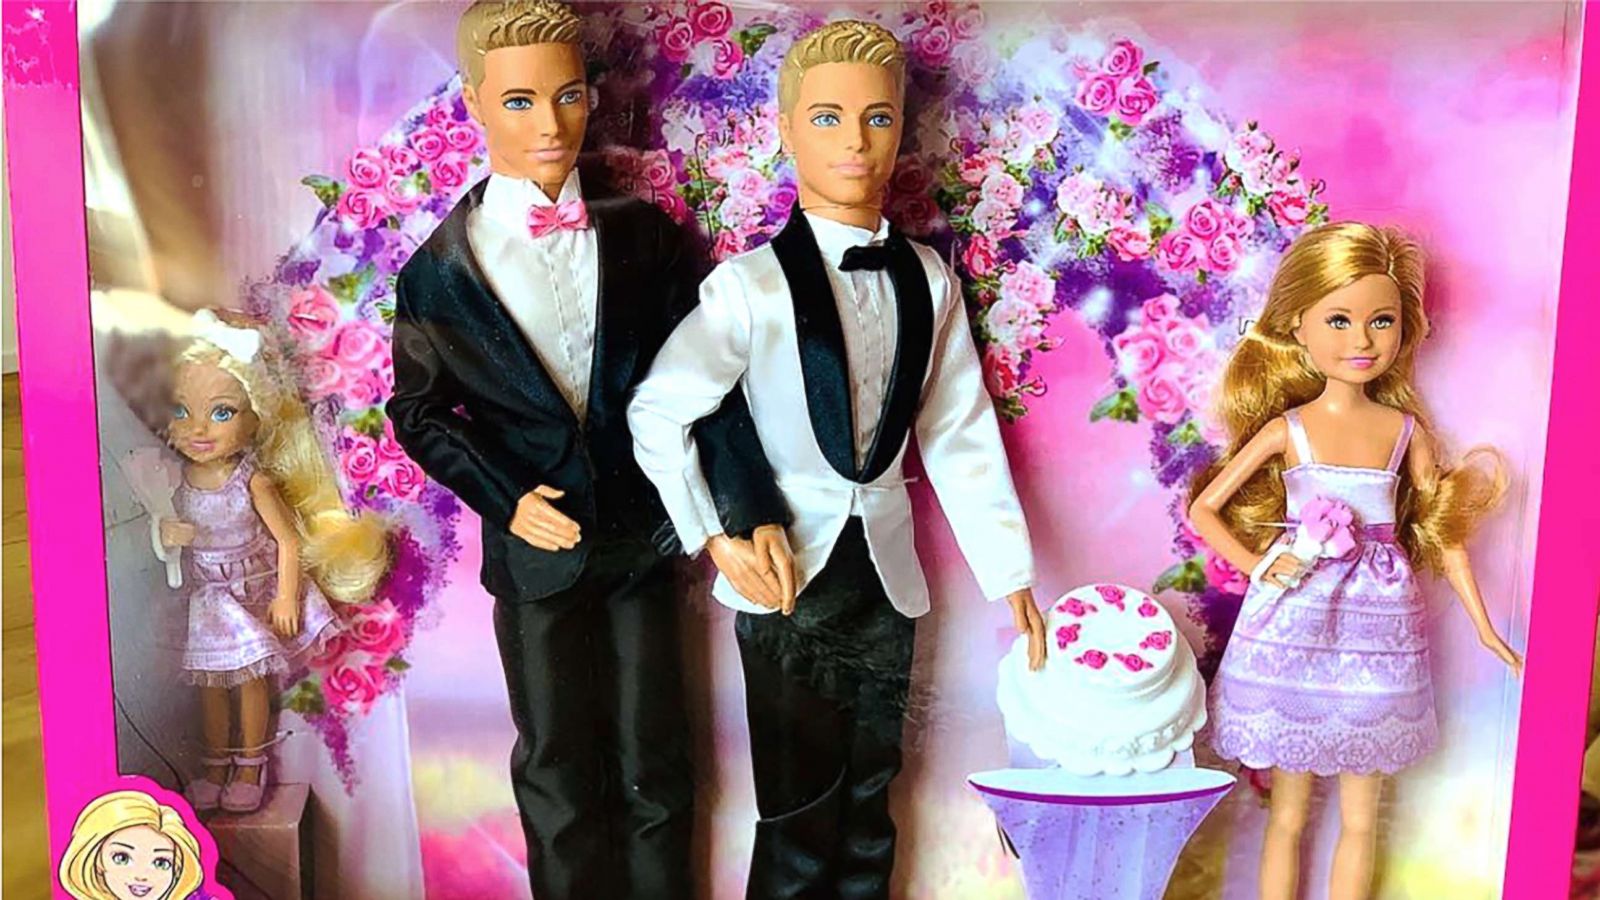 Uncles gift to little girl inspires toy giant to consider a same-sex wedding photo